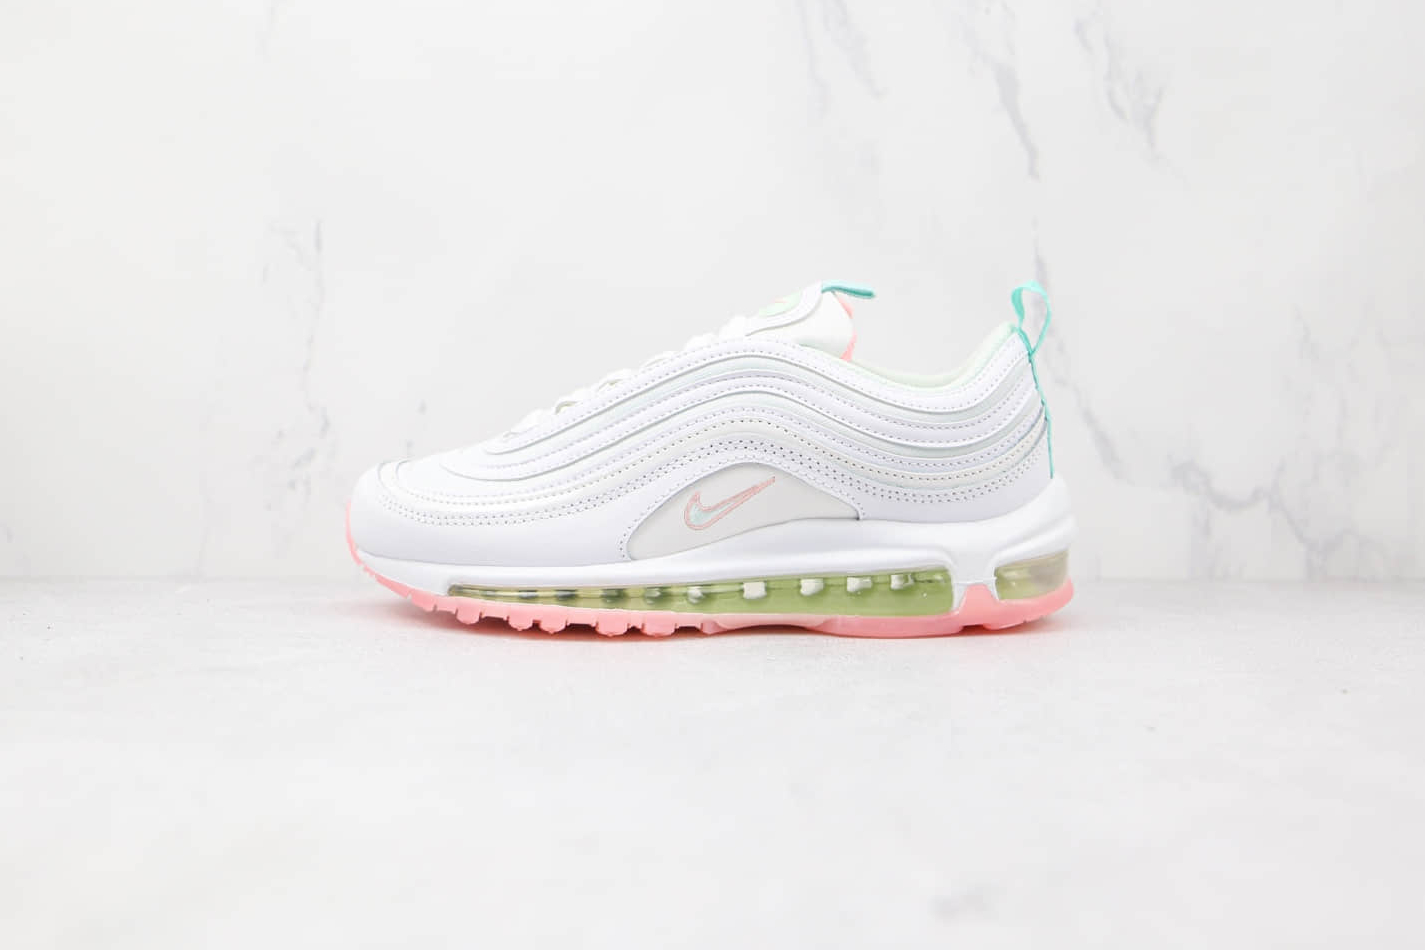 Nike Air Max 97 'White Barely Green' DJ1498-100 - Stylish and Comfortable Women's Sneakers